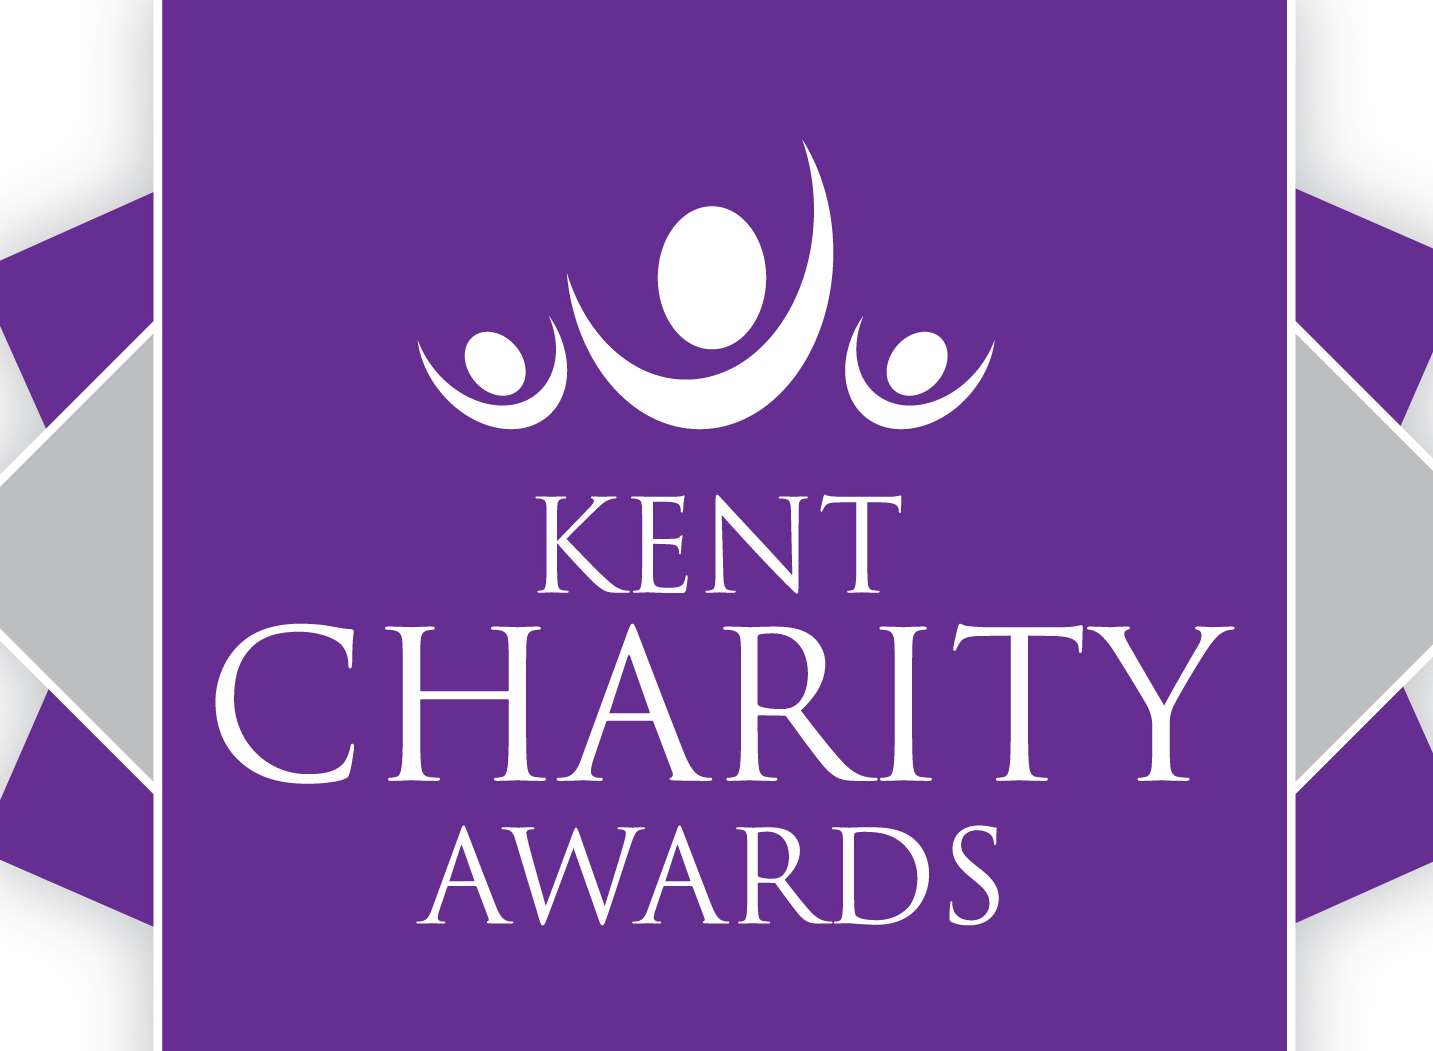 The Kent Charity Awards ceremony will be held in March